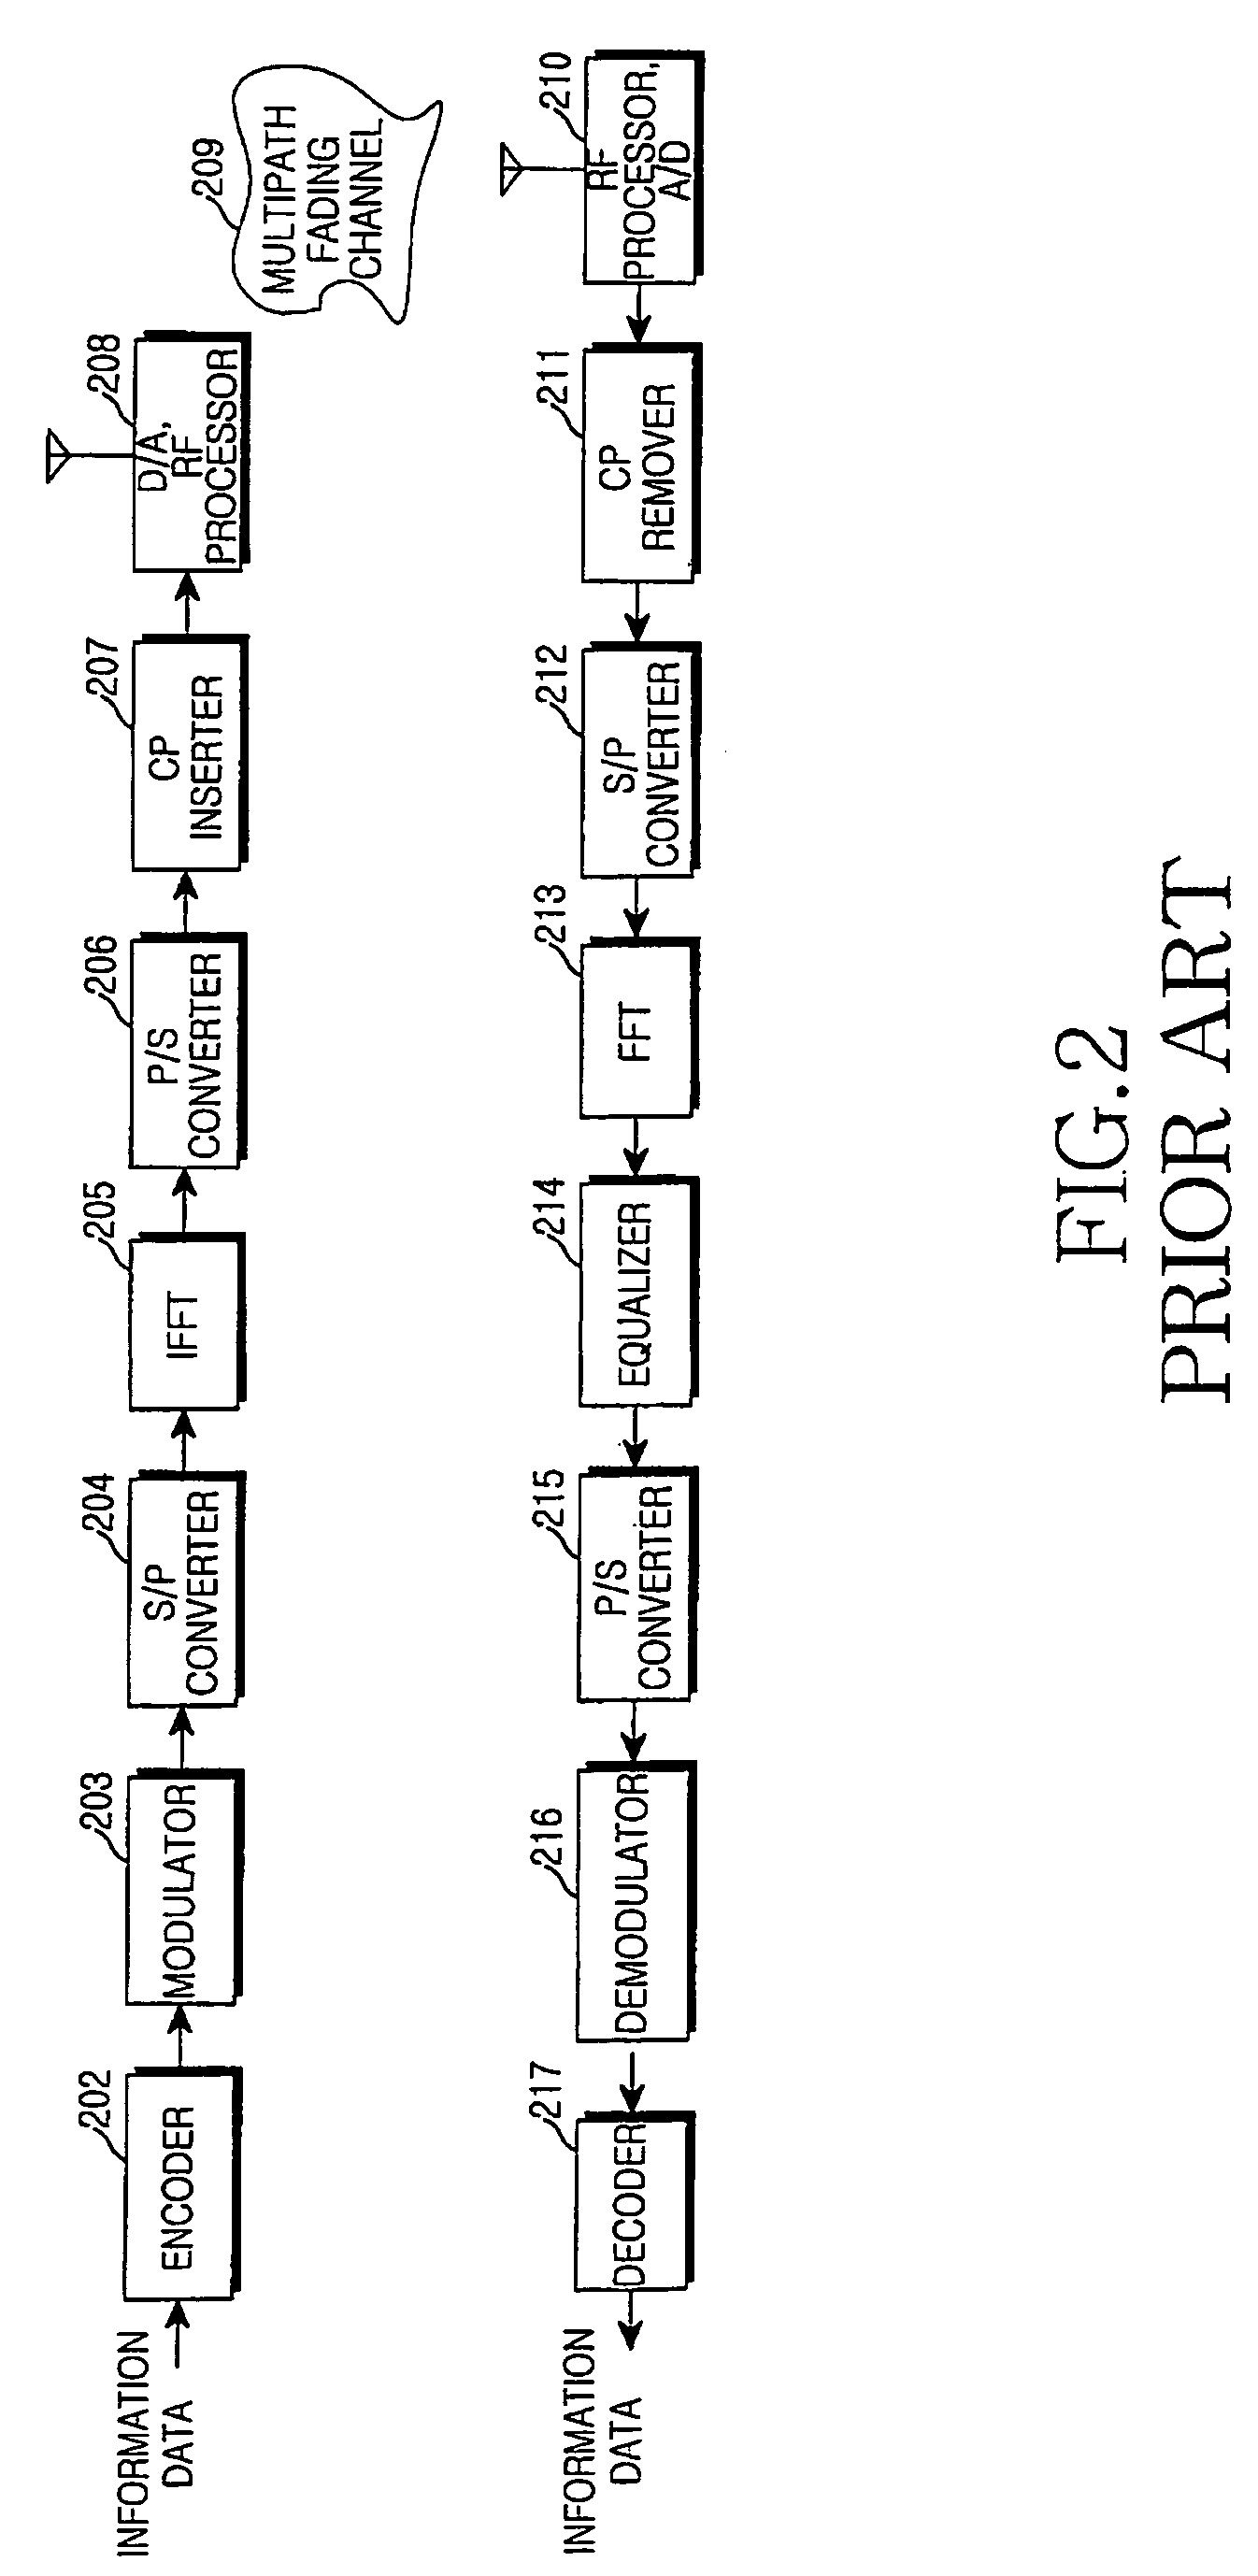 Apparatus and method for canceling inter-symbol interference in a broadband wireless communication system